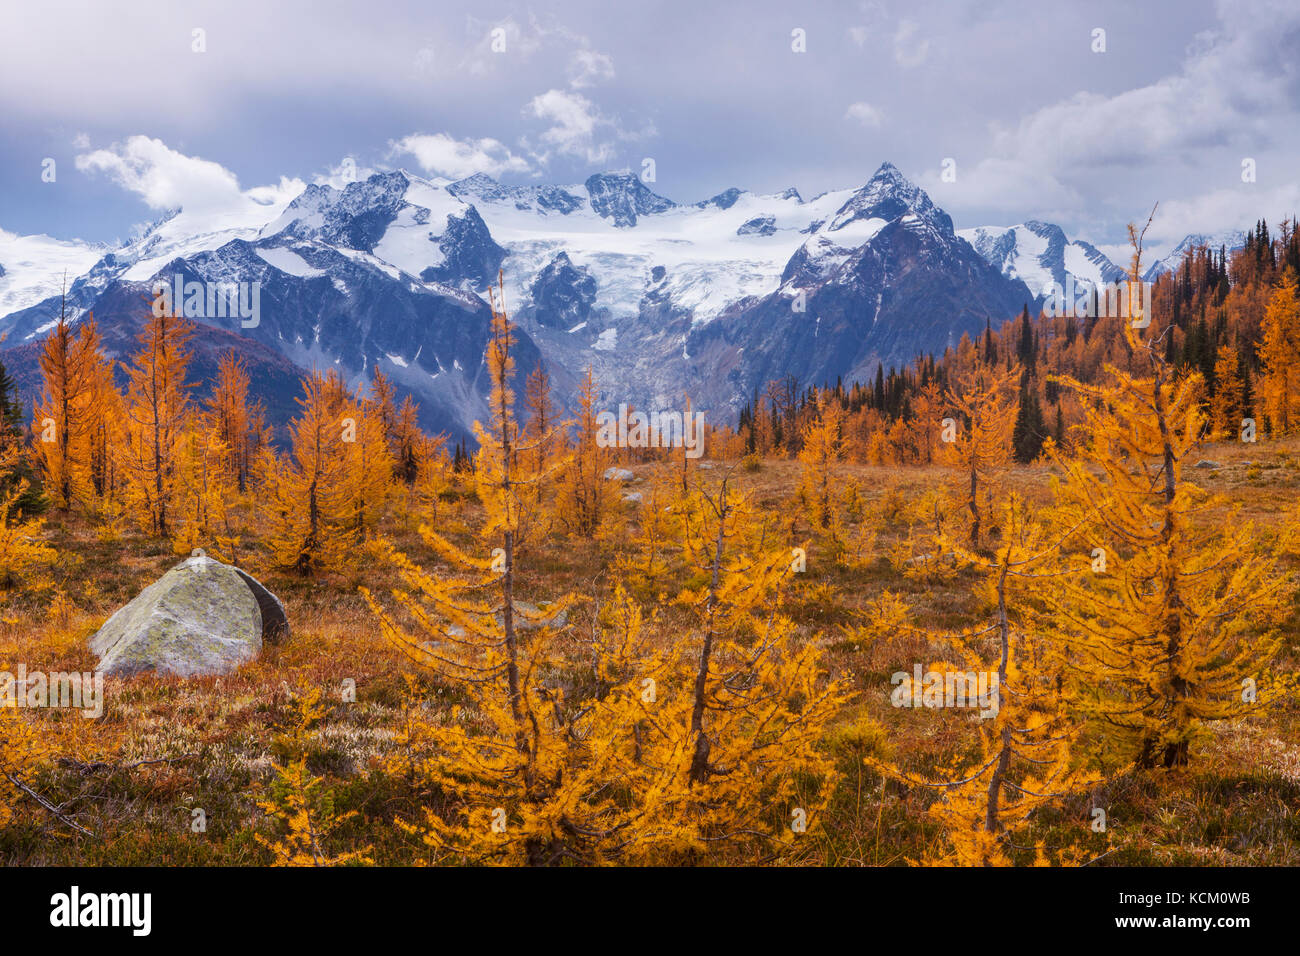 Mount Macbeth above fall larches in Monica Meadows, Purcell Mountains, British Columbia, Canada. Stock Photo